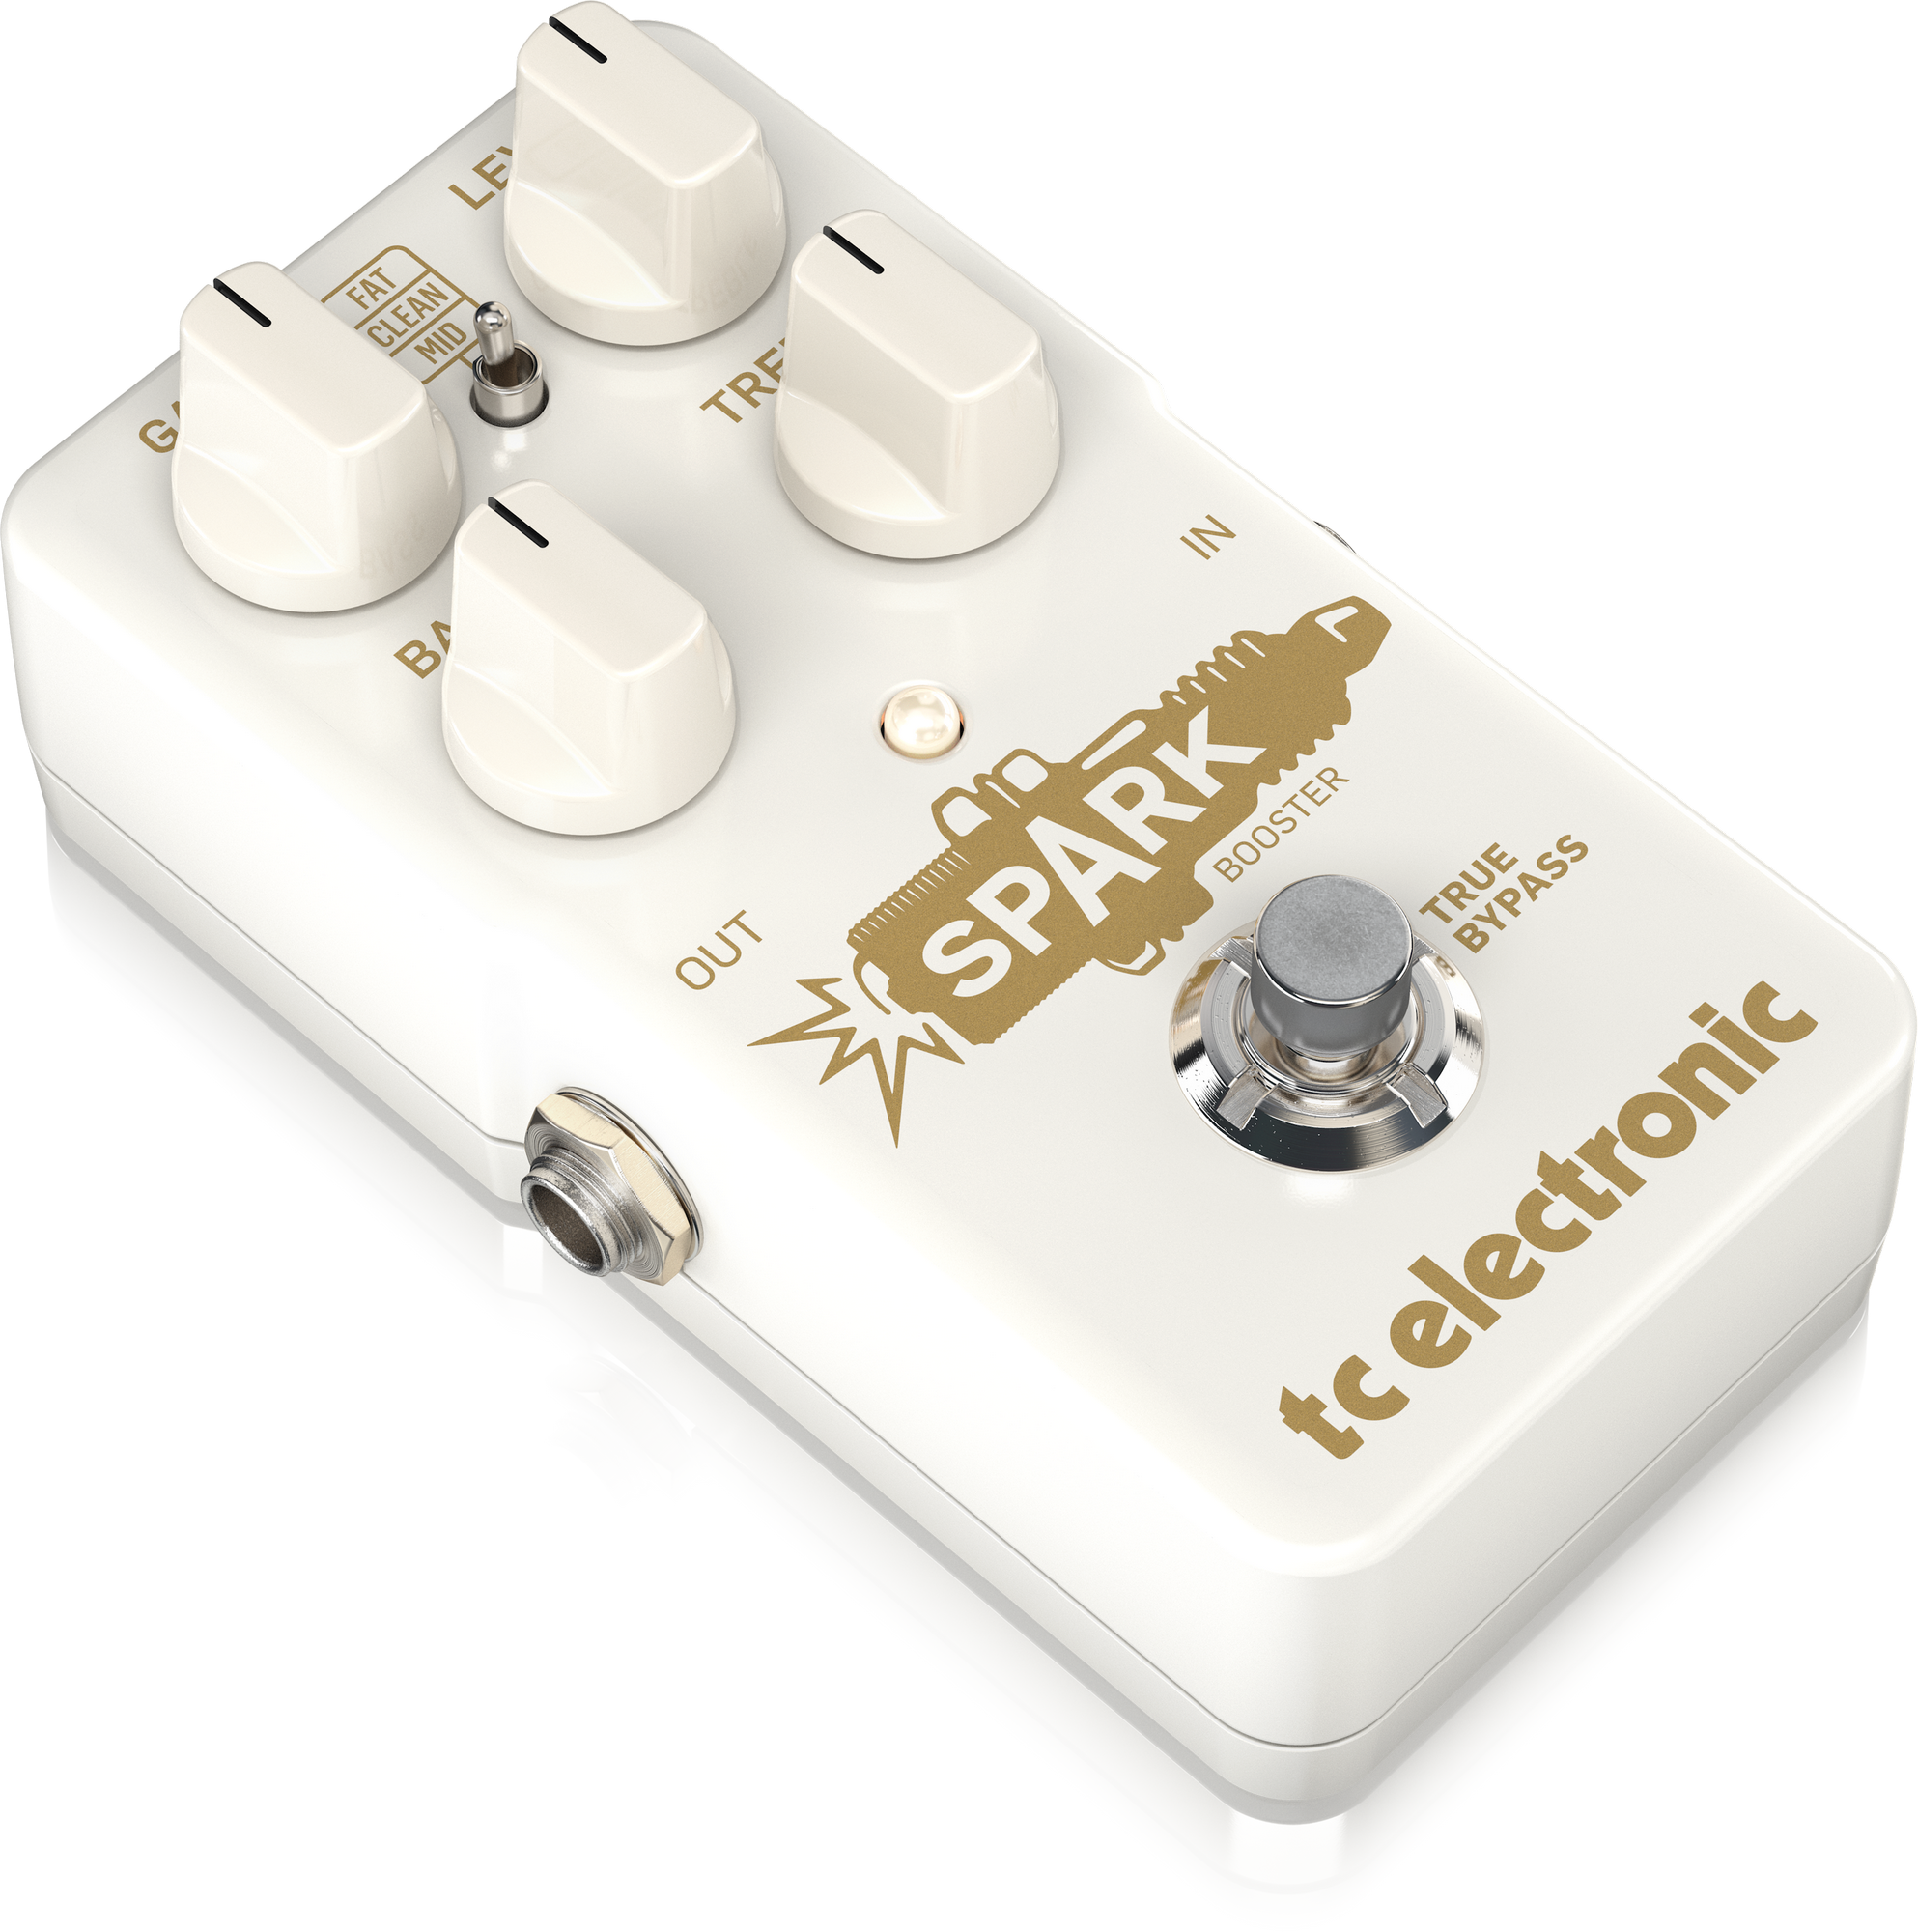 TC Electronic Spark Booster Awesome Booster Pedal With Gain Control And Active EQ, TC ELECTRONIC, EFFECTS, tc-electronic-effects-tc-spark-booster, ZOSO MUSIC SDN BHD